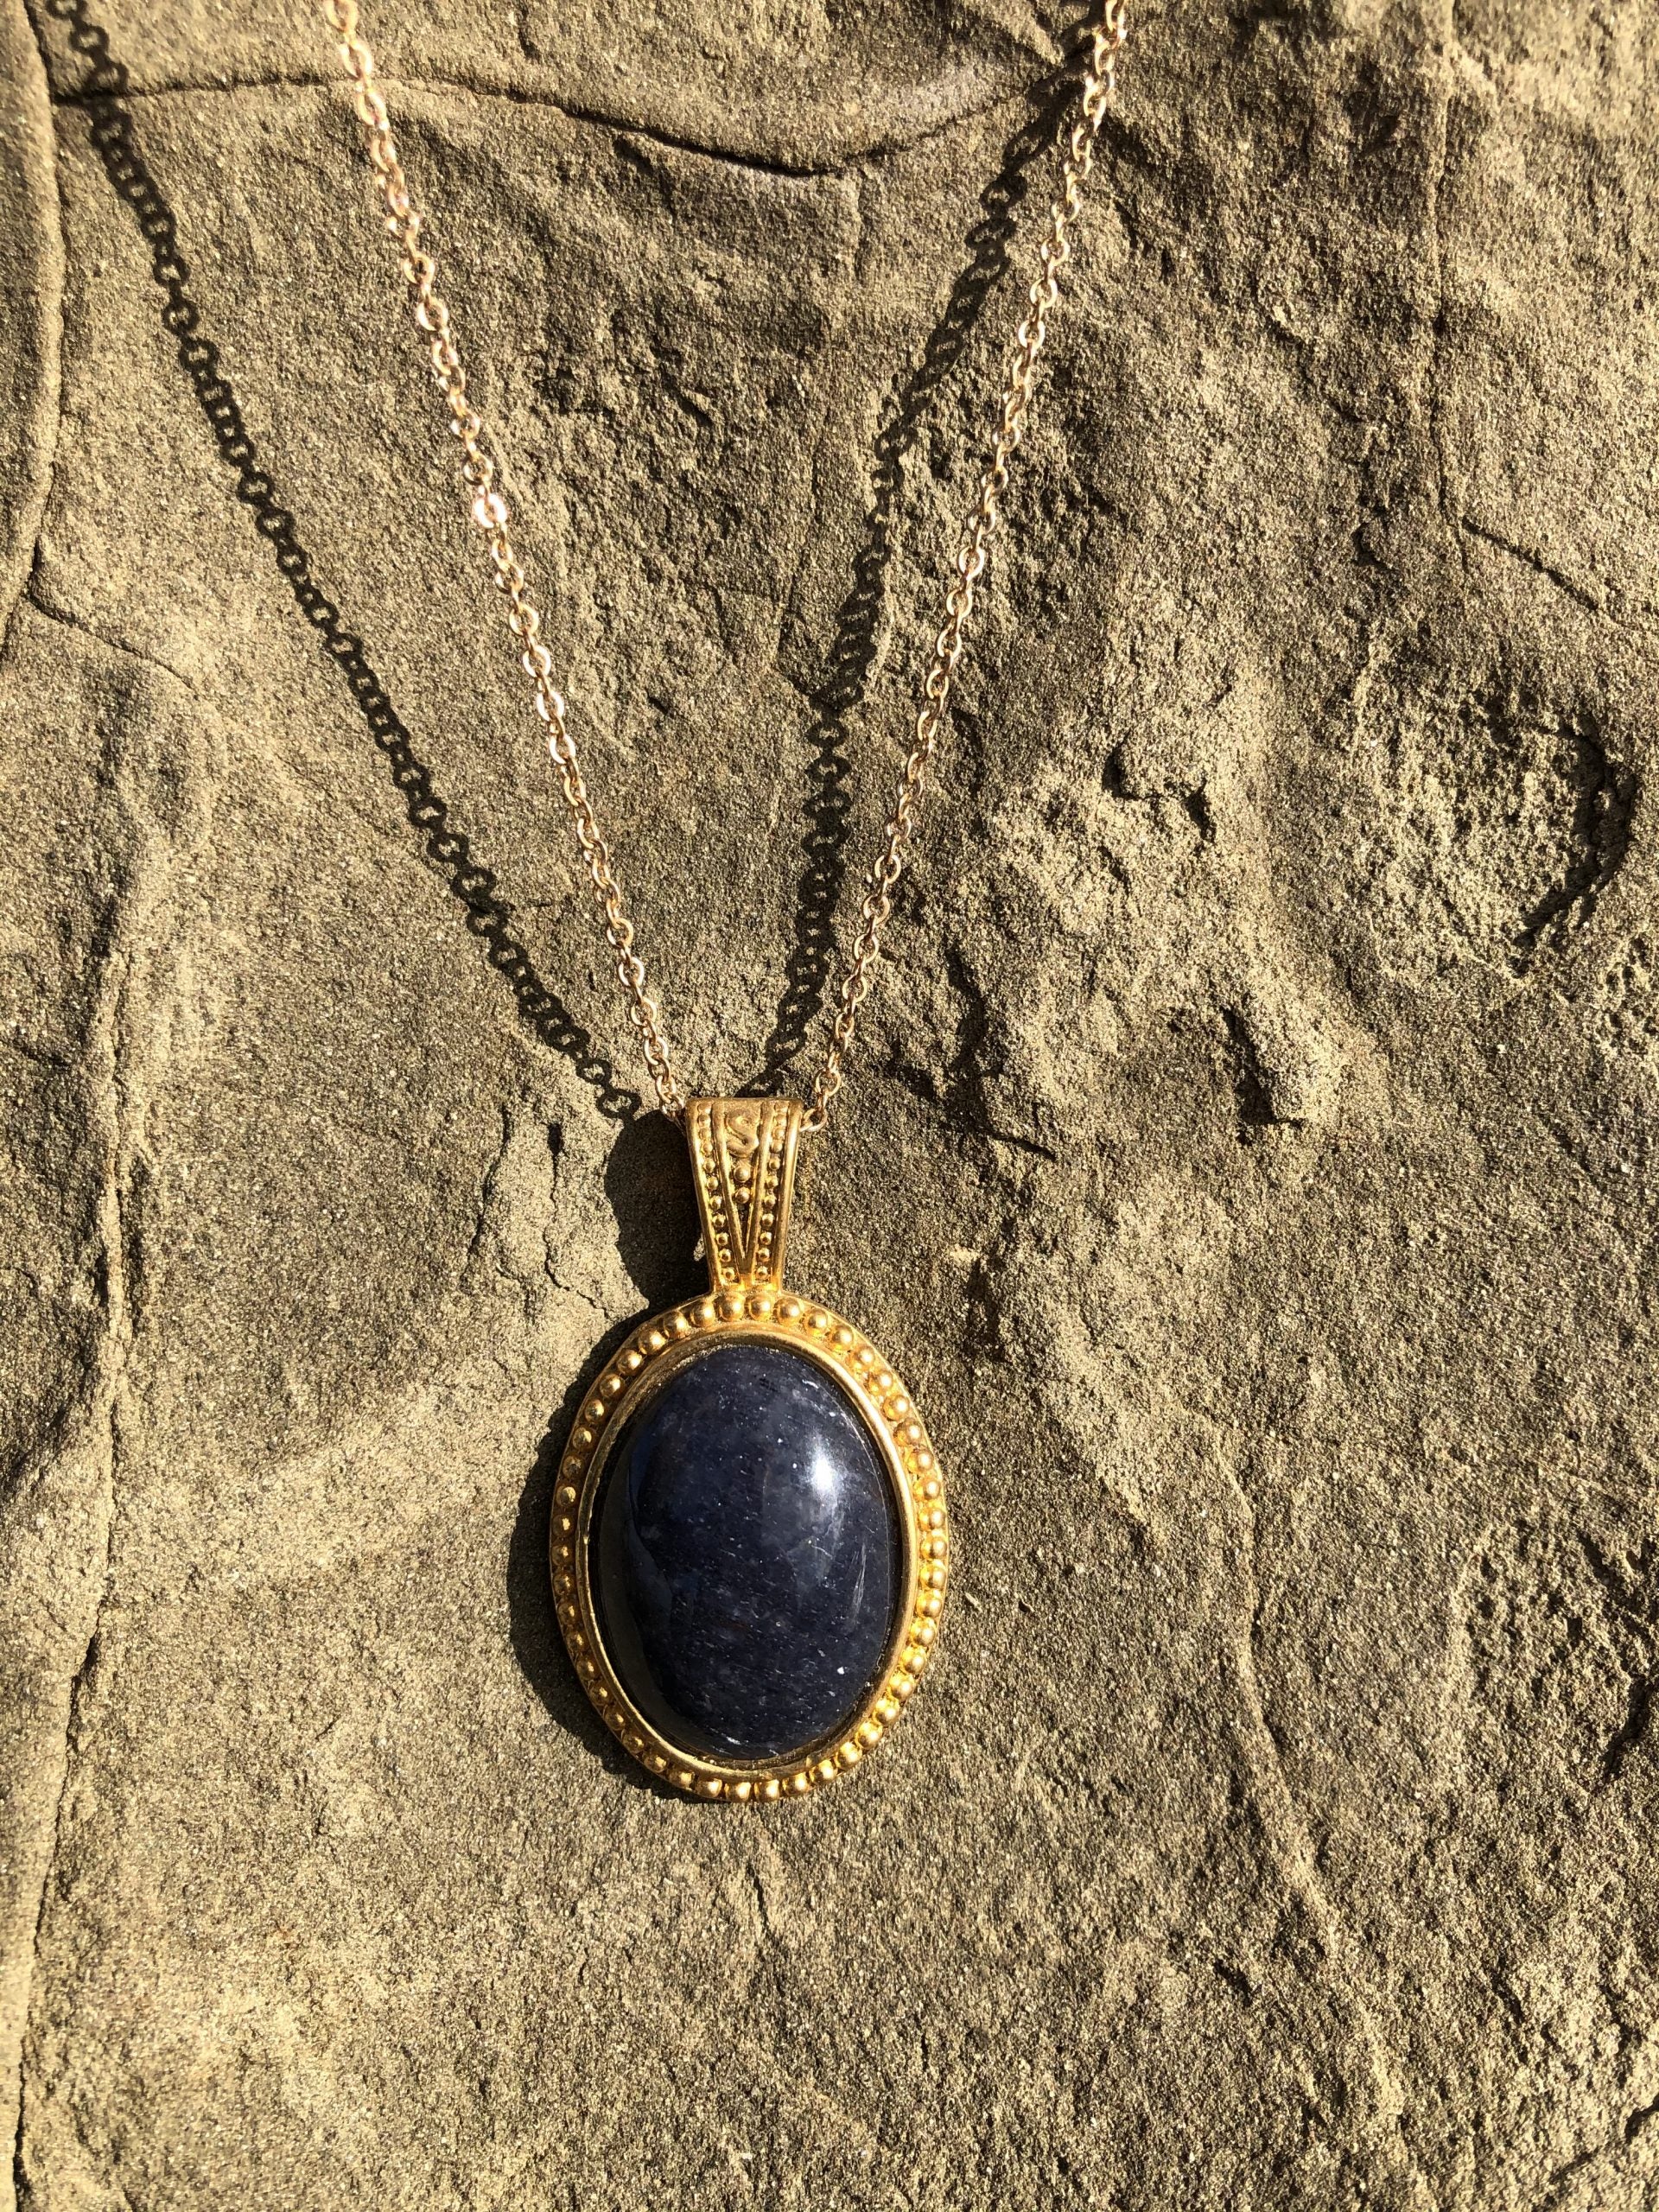 Necklace with natural blue aventurine, hand polished to a 25x18mm cabochon and set in a gold plated setting with 19 inch chain, on rock